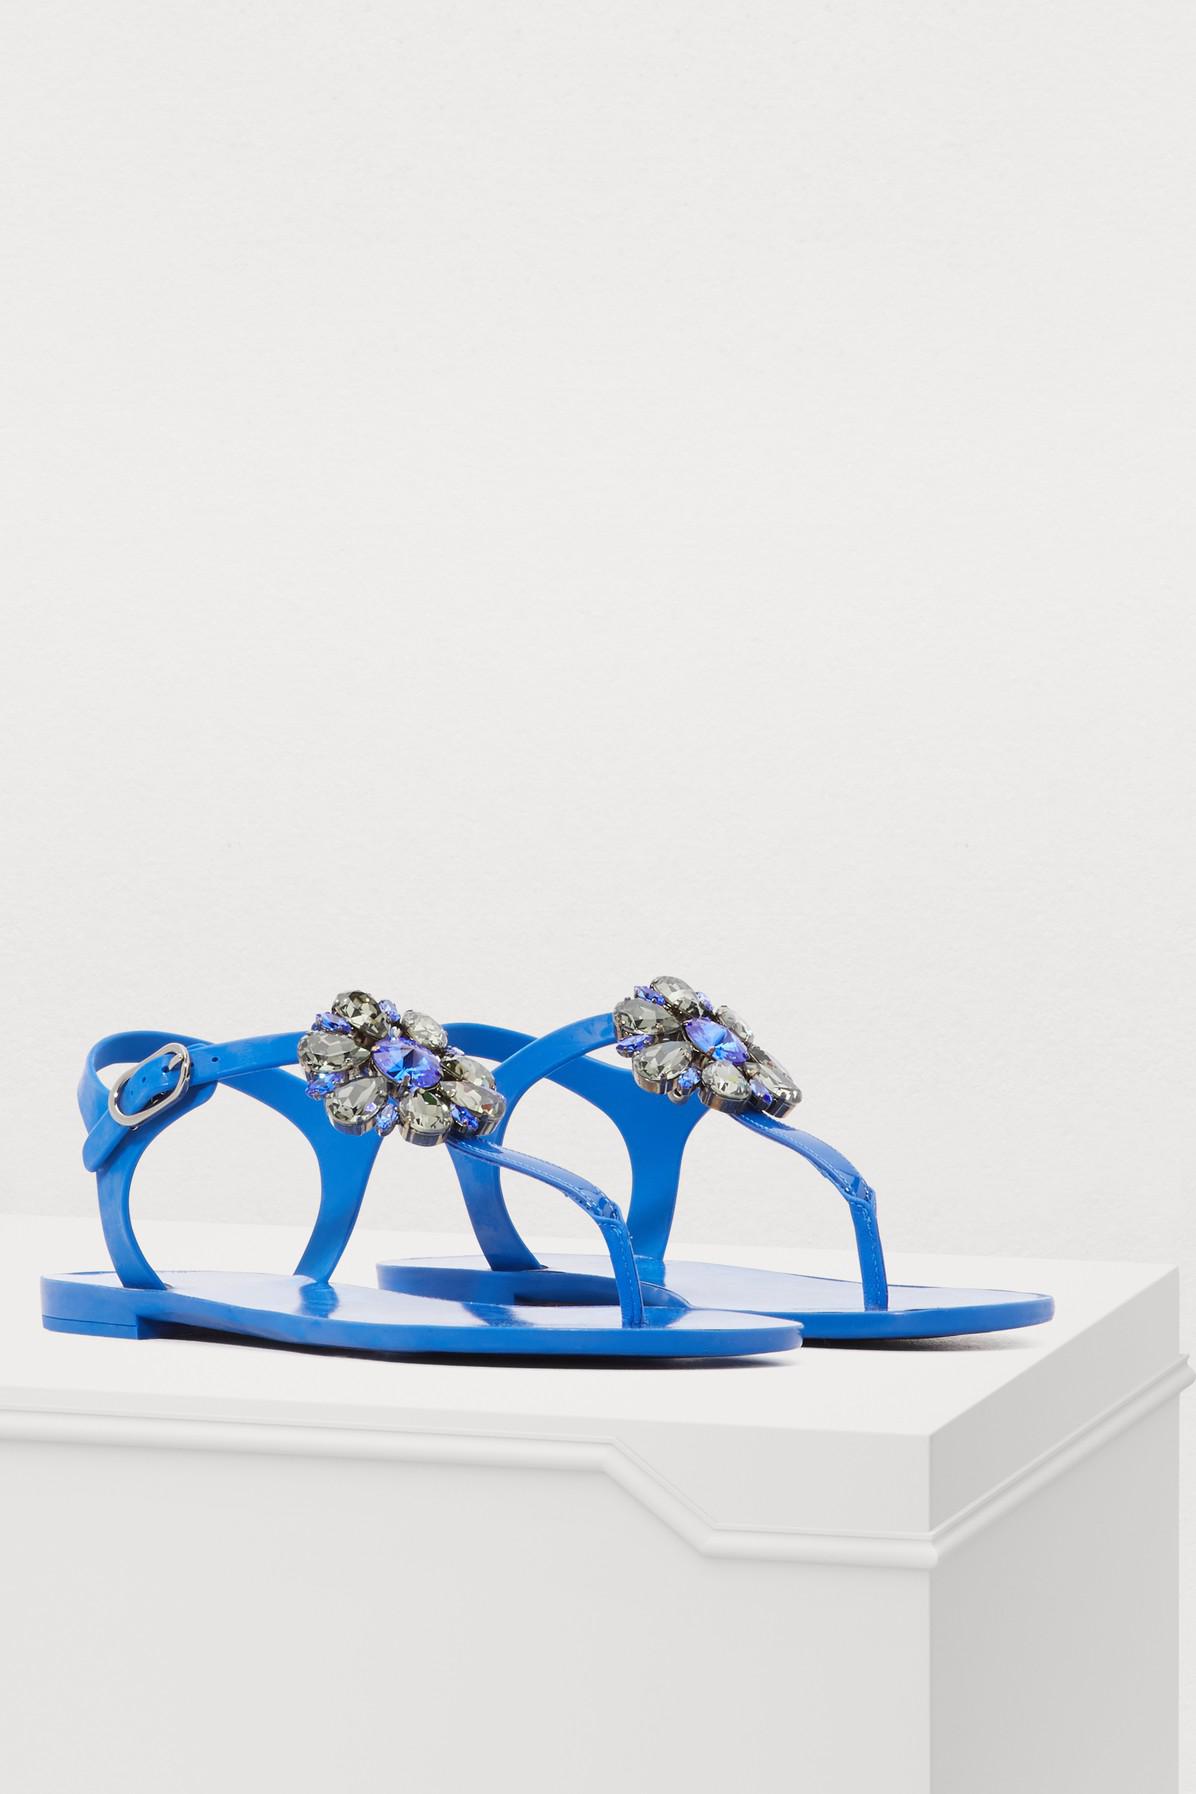 dolce and gabbana jelly sandals